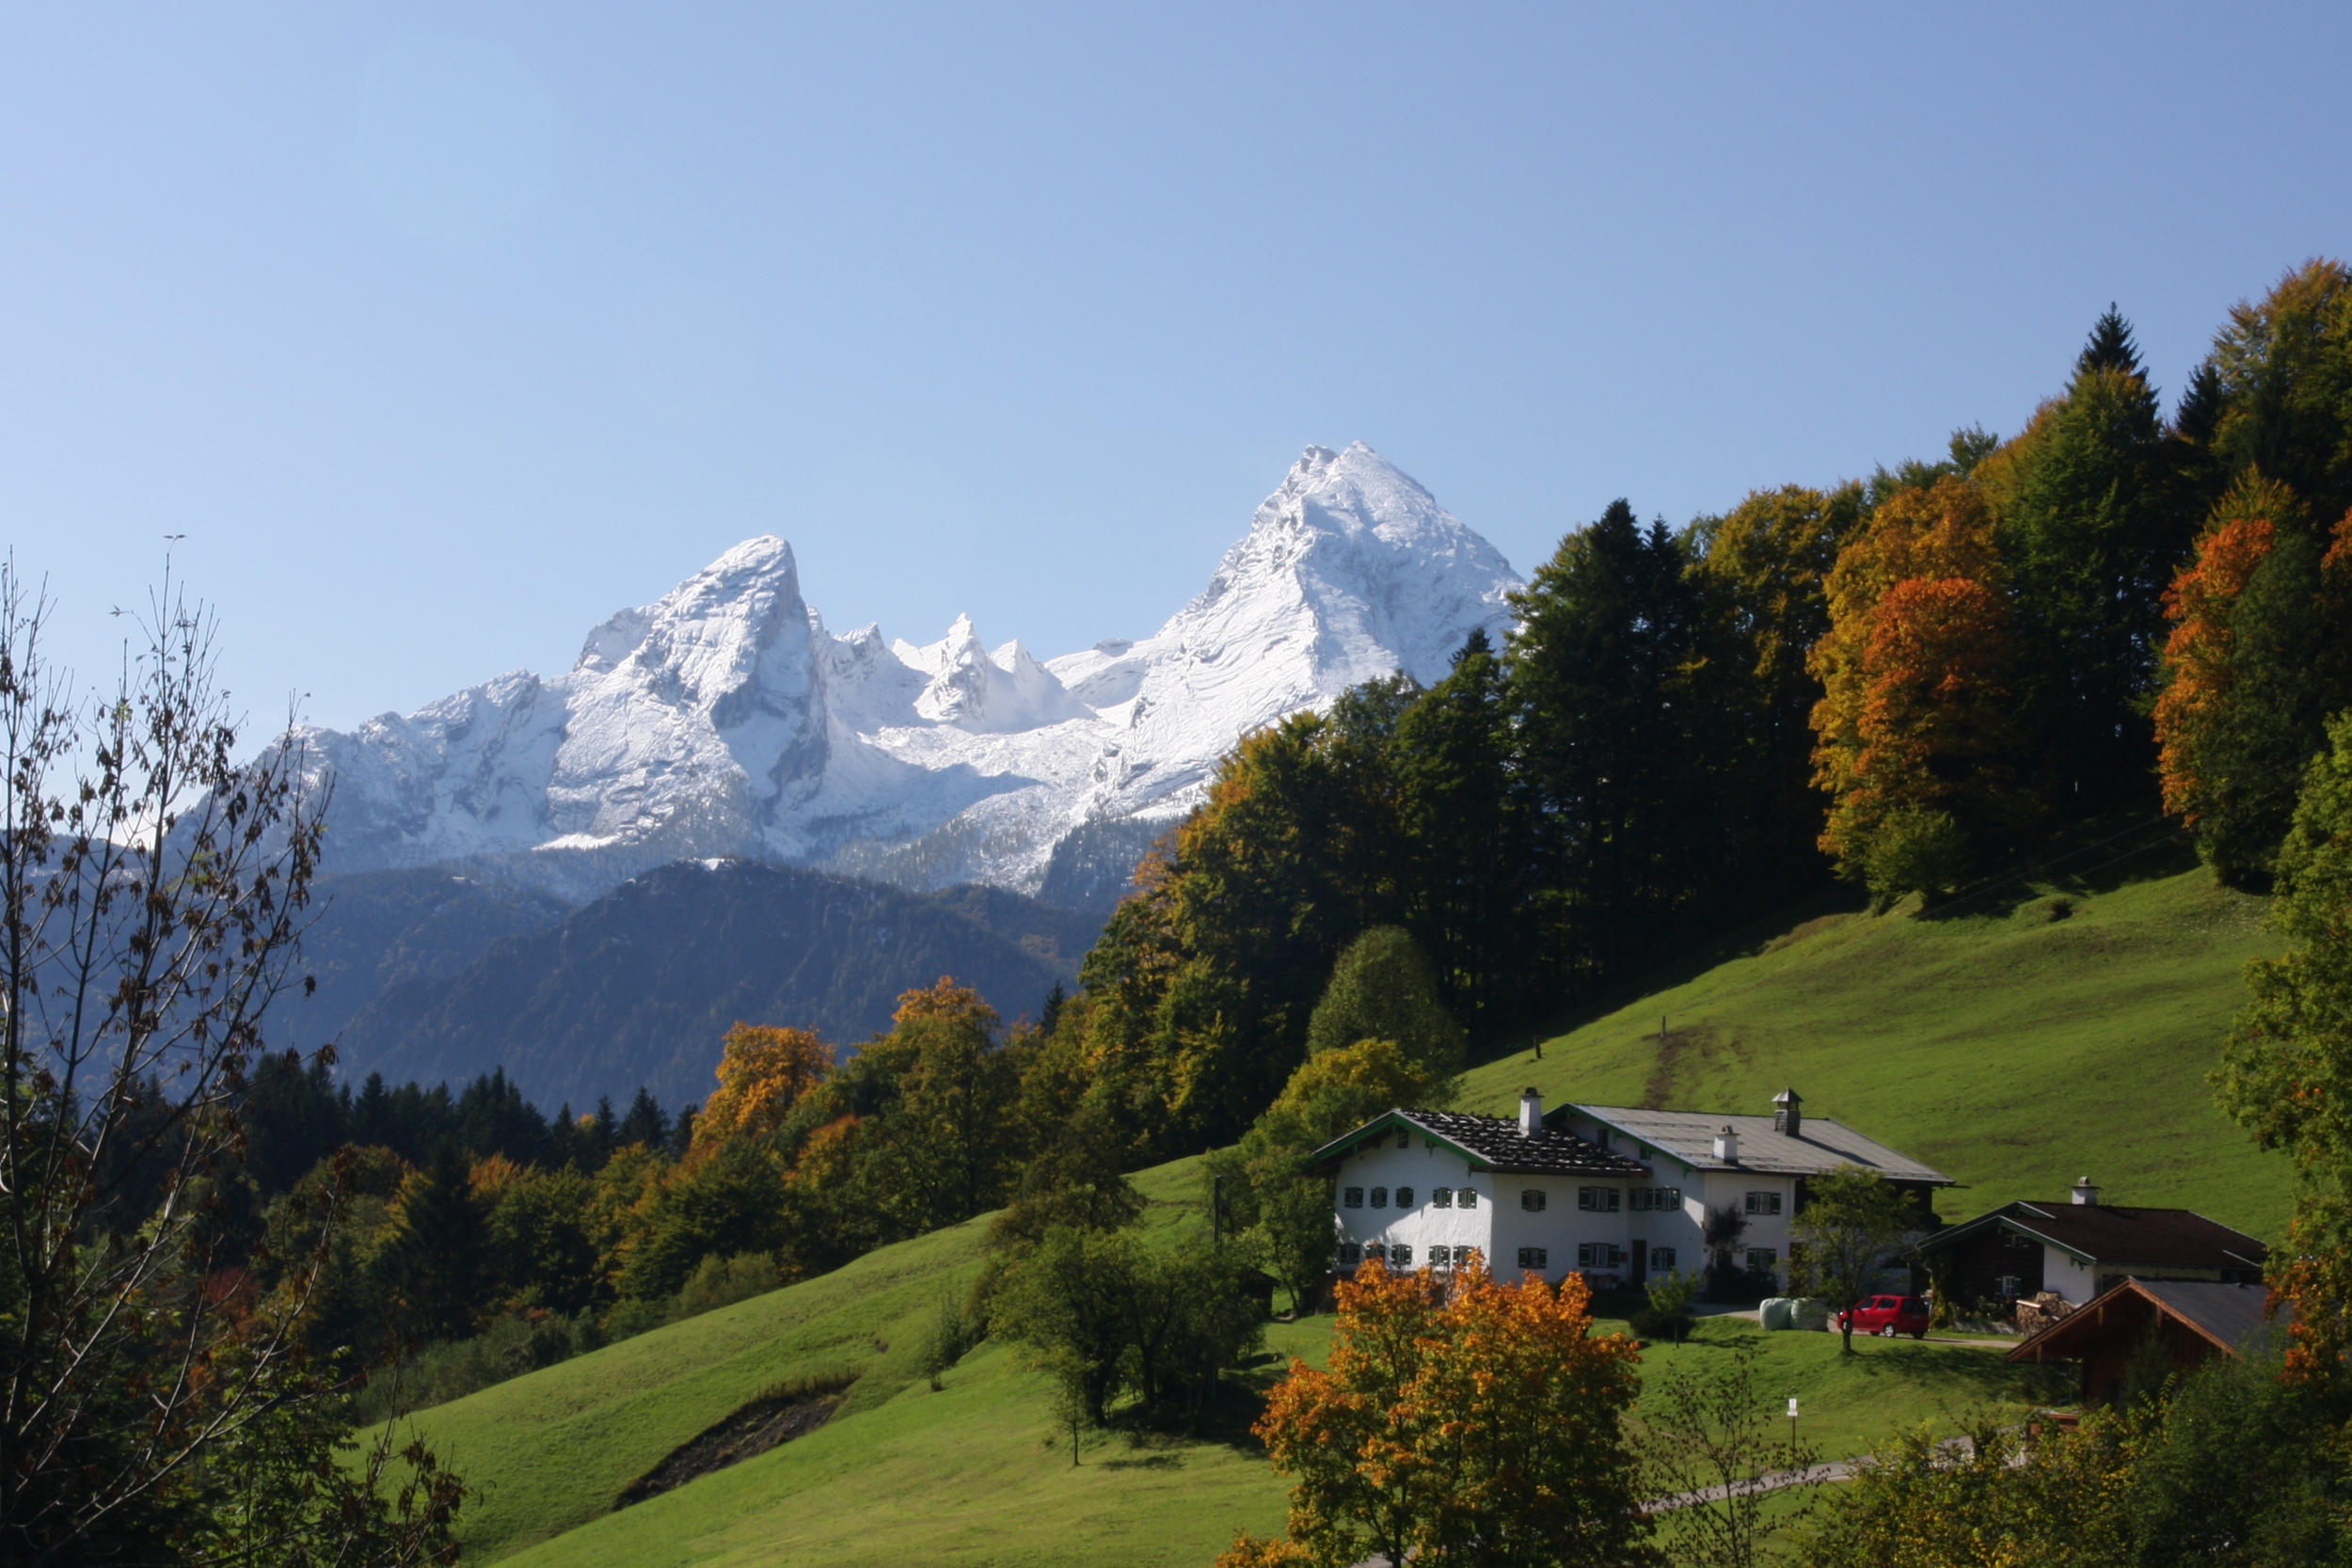 A house in front of a mountain in Berchtesgaden Alps